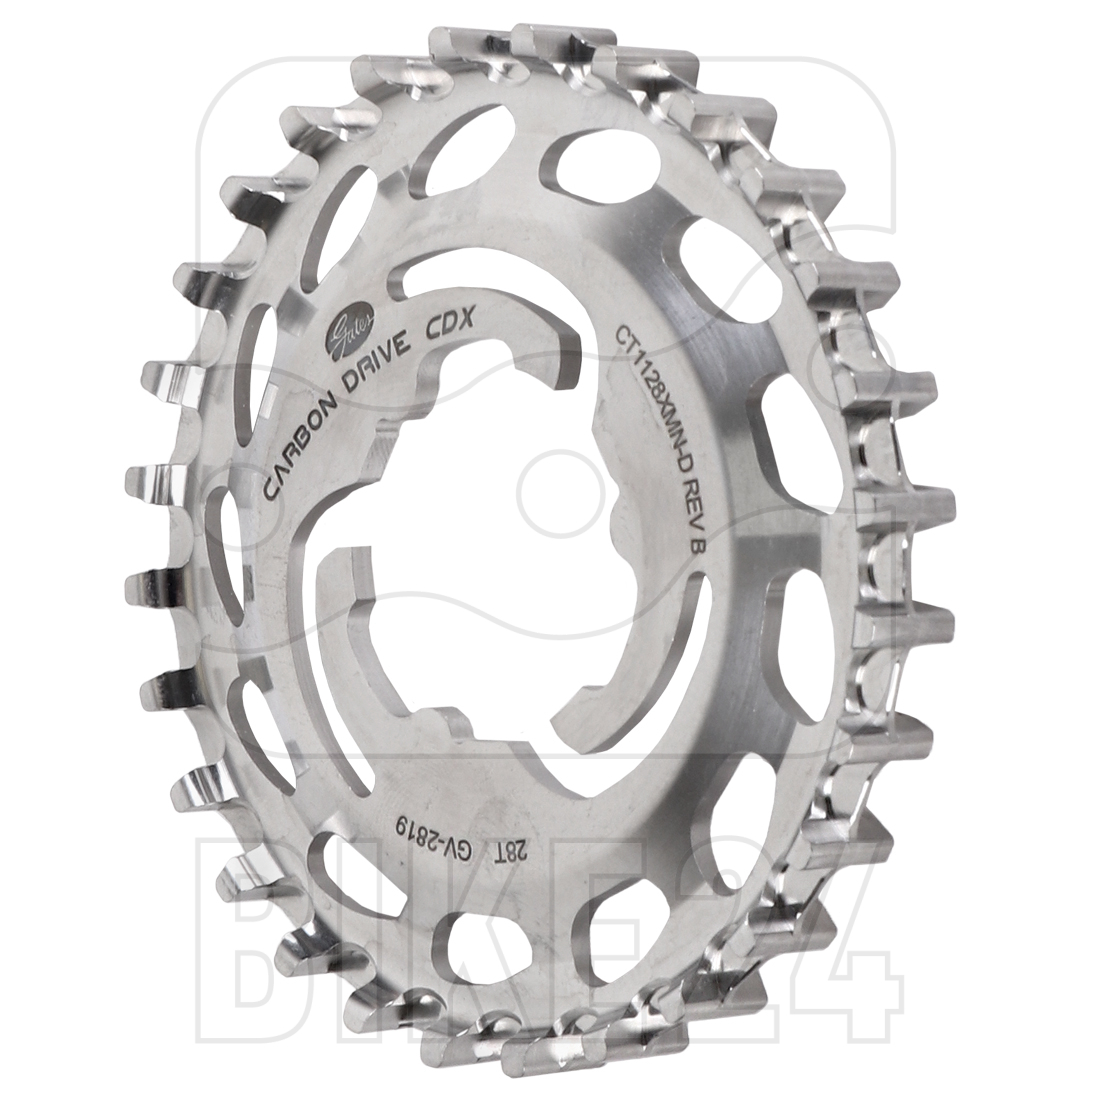 Picture of Gates Carbon Drive CDX Centertrack Sprocket - Stainless Steel - Surefit - Di2 - silver